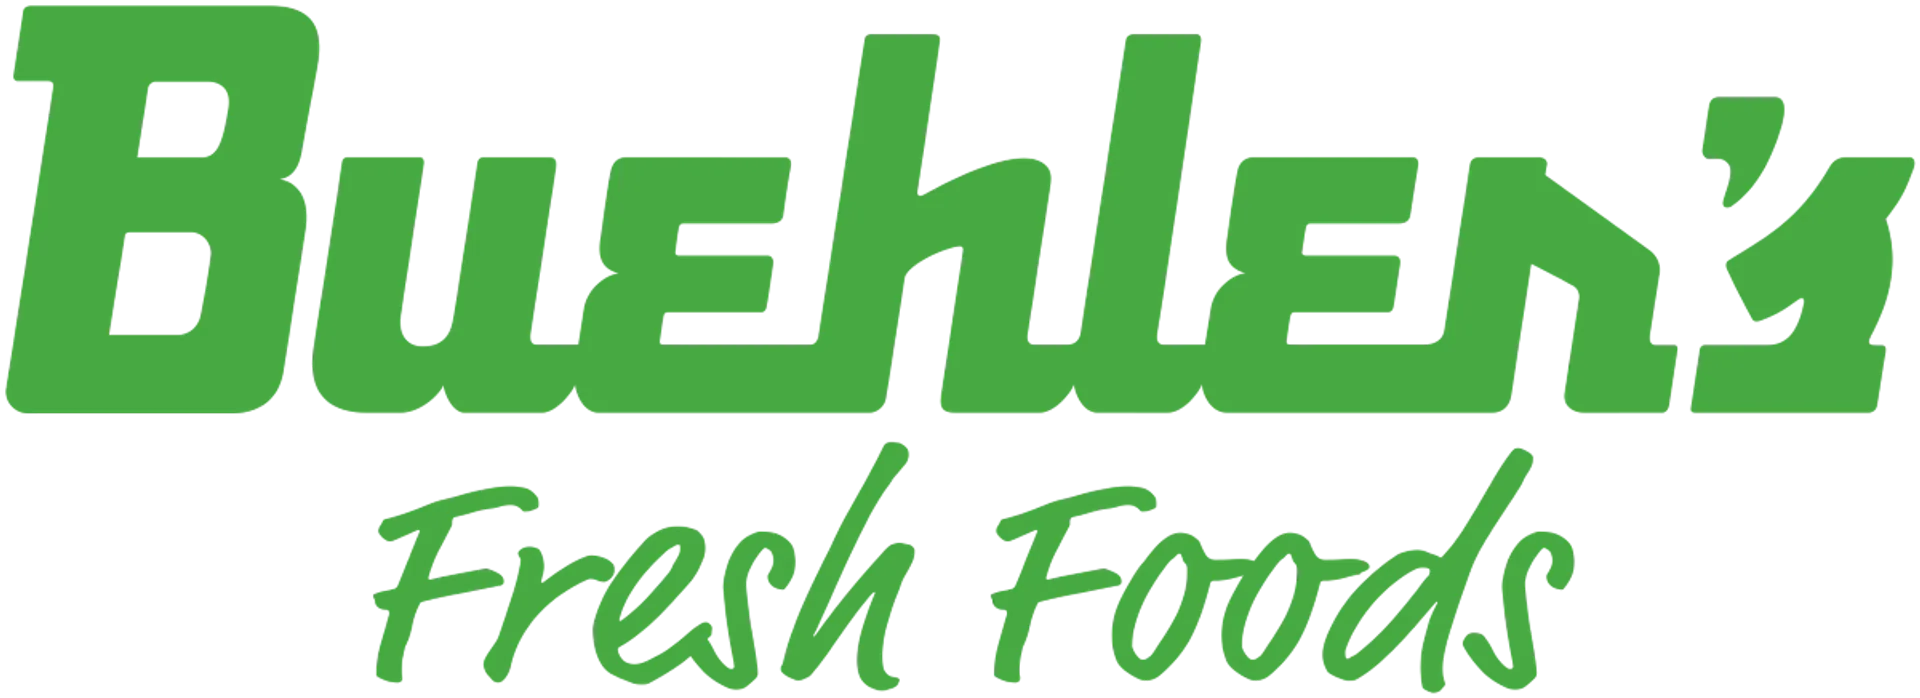 BUEHLER'S FRESH FOODS logo. Current weekly ad